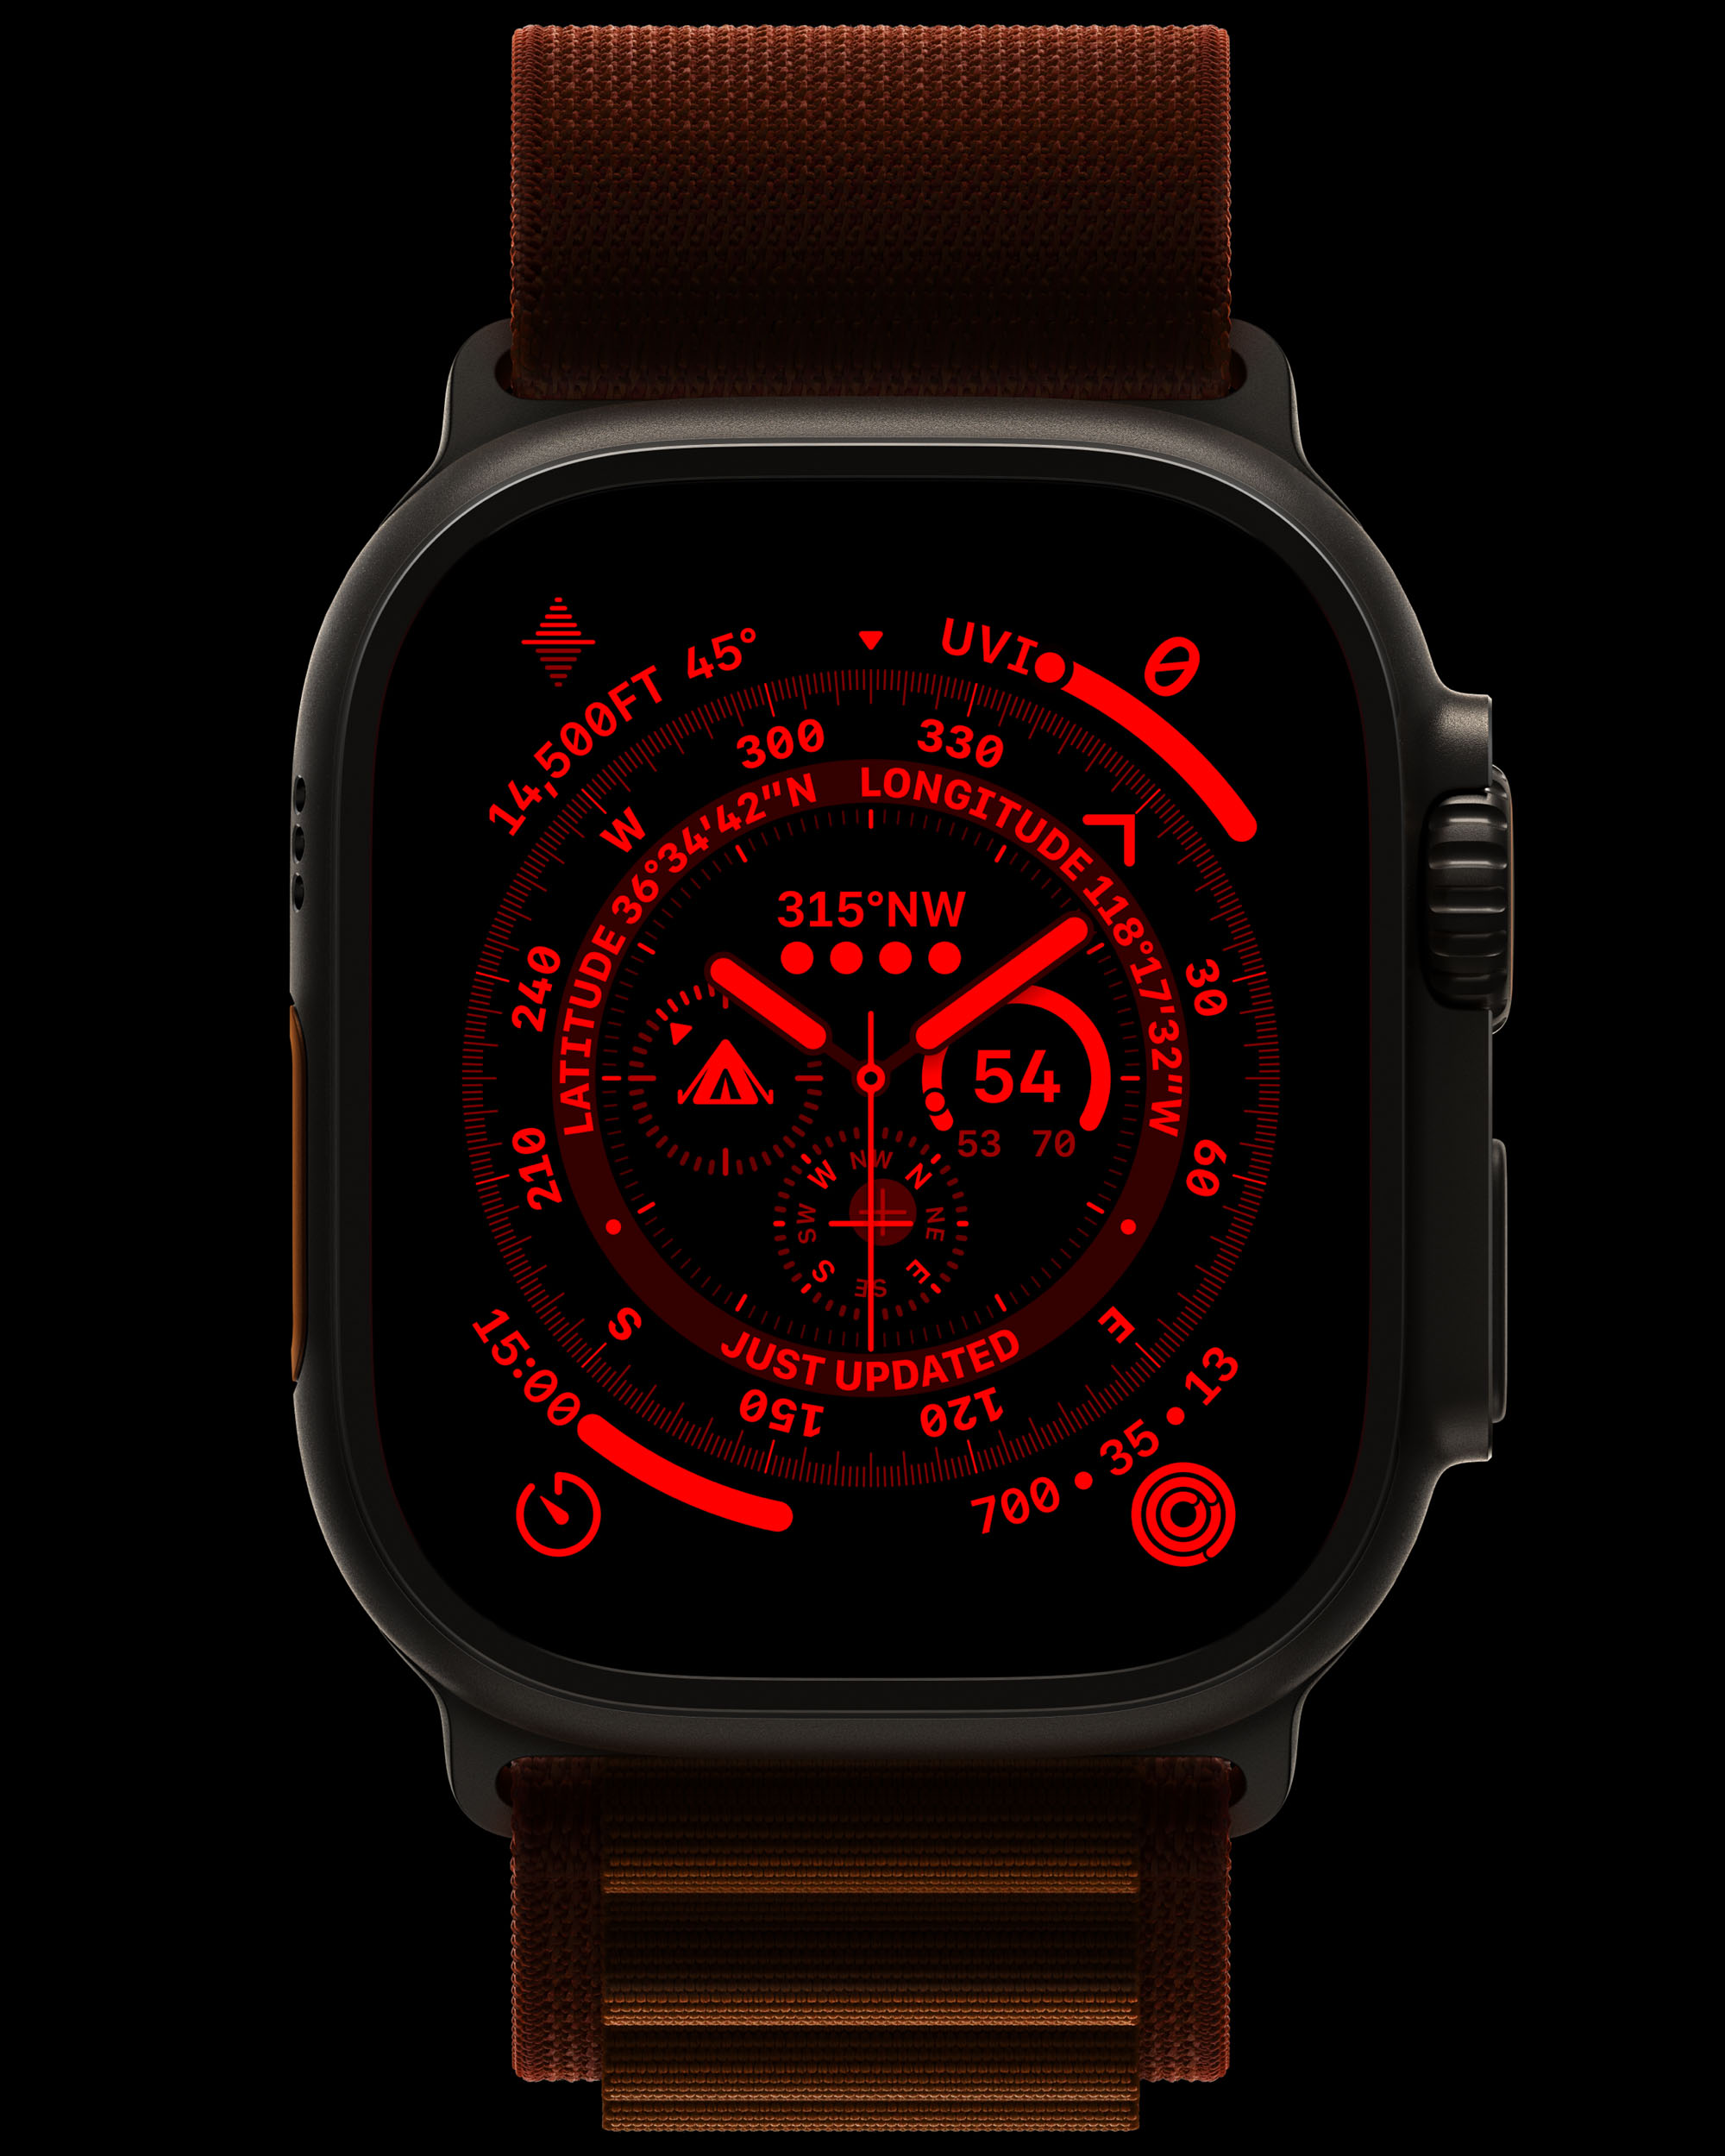 Apple Watch Ultra Is $799 Ultra-Rugged Smartwatch Designed For 